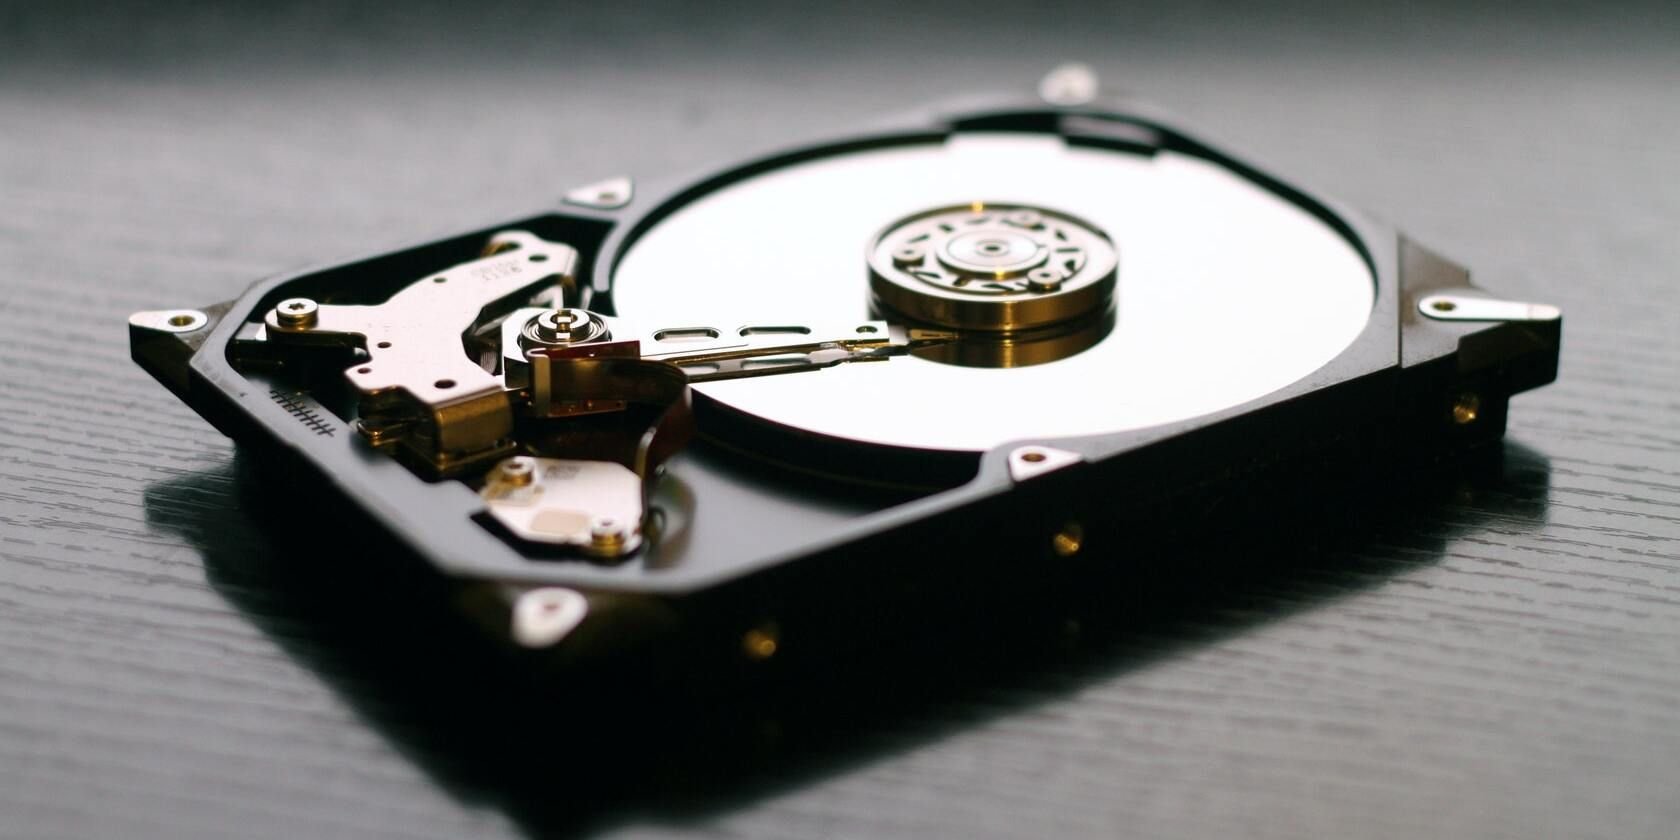 How to Recover Lost or Damaged Data With TestDisk